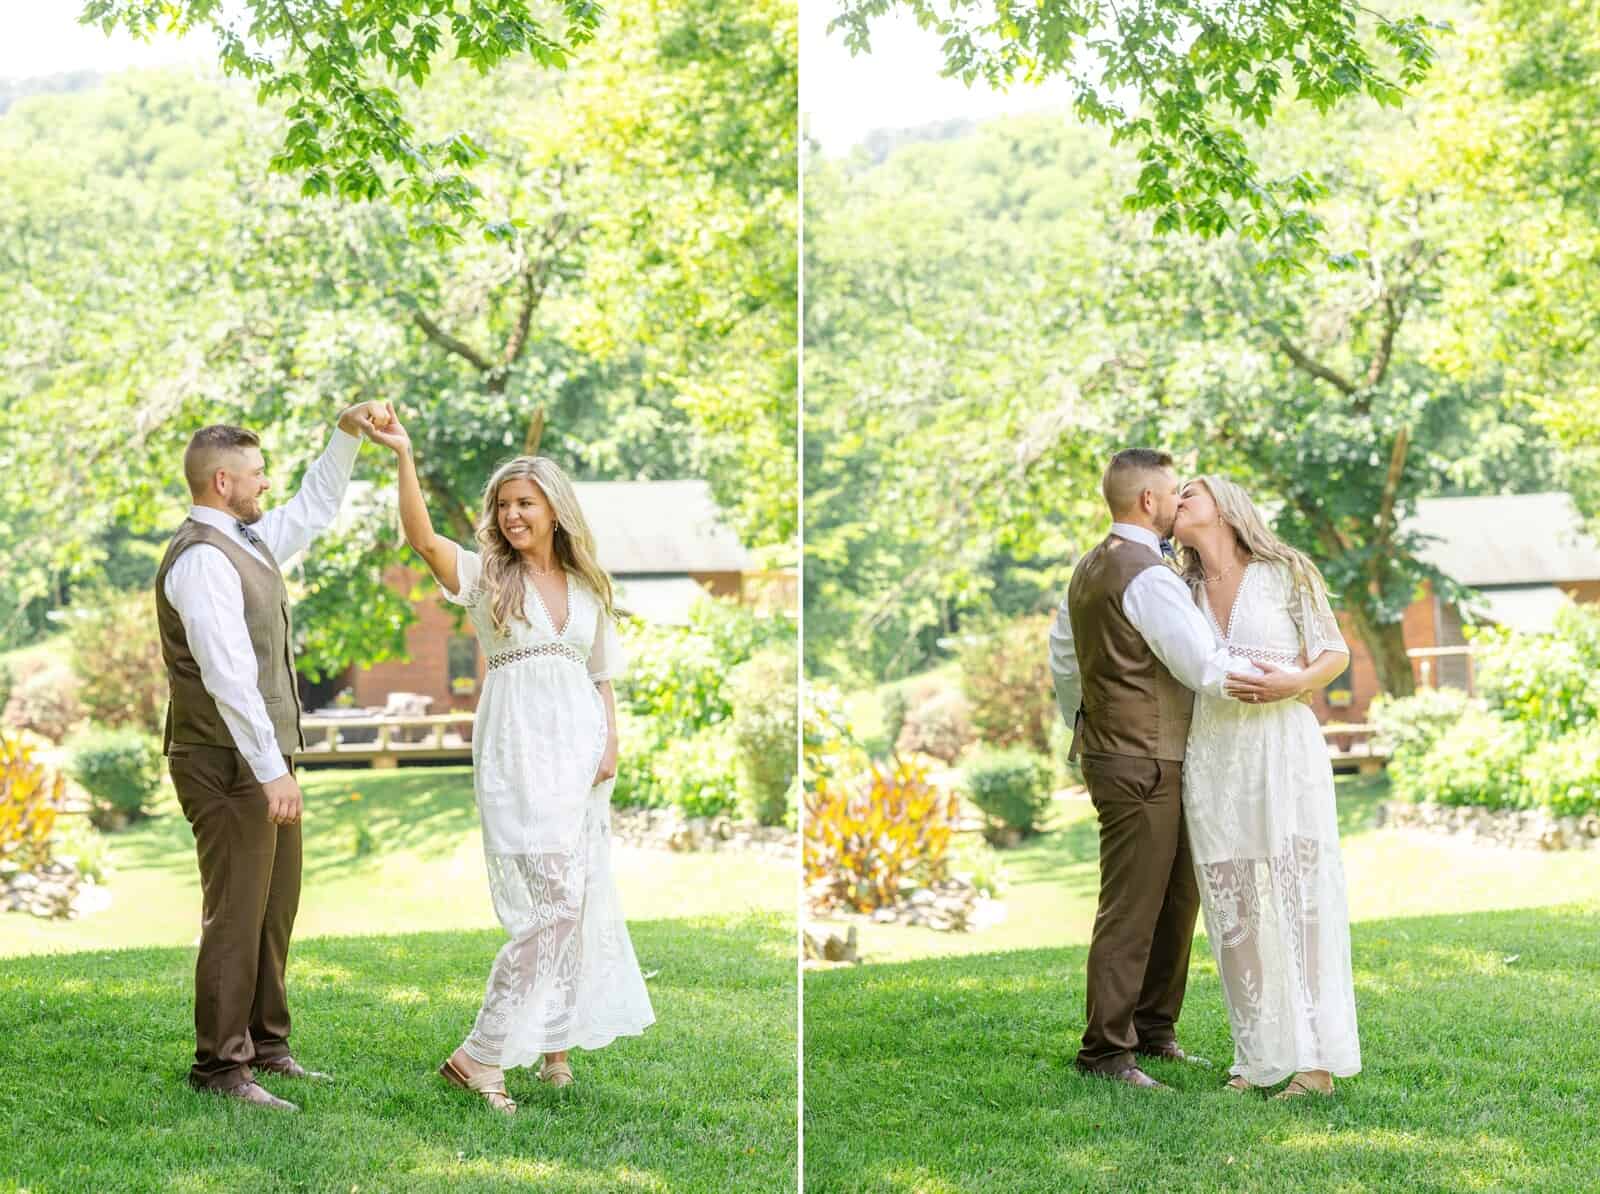 Bride and groom share twirl and dance under sunny trees